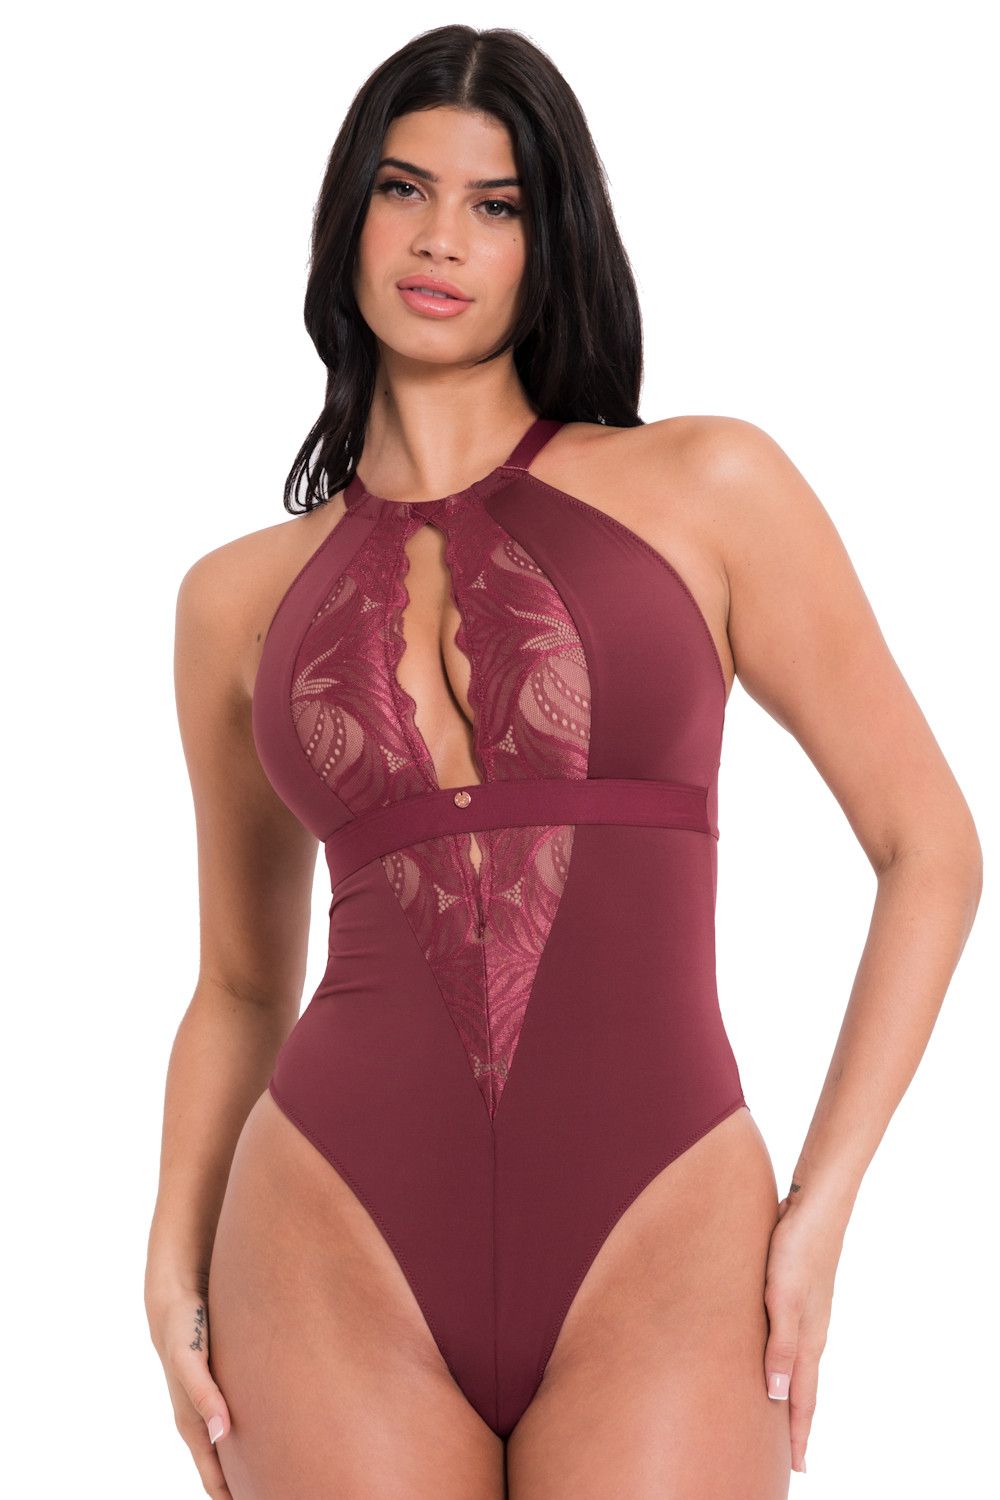 Scantilly by Curvy Kate Indulgence Lace Body Oxblood